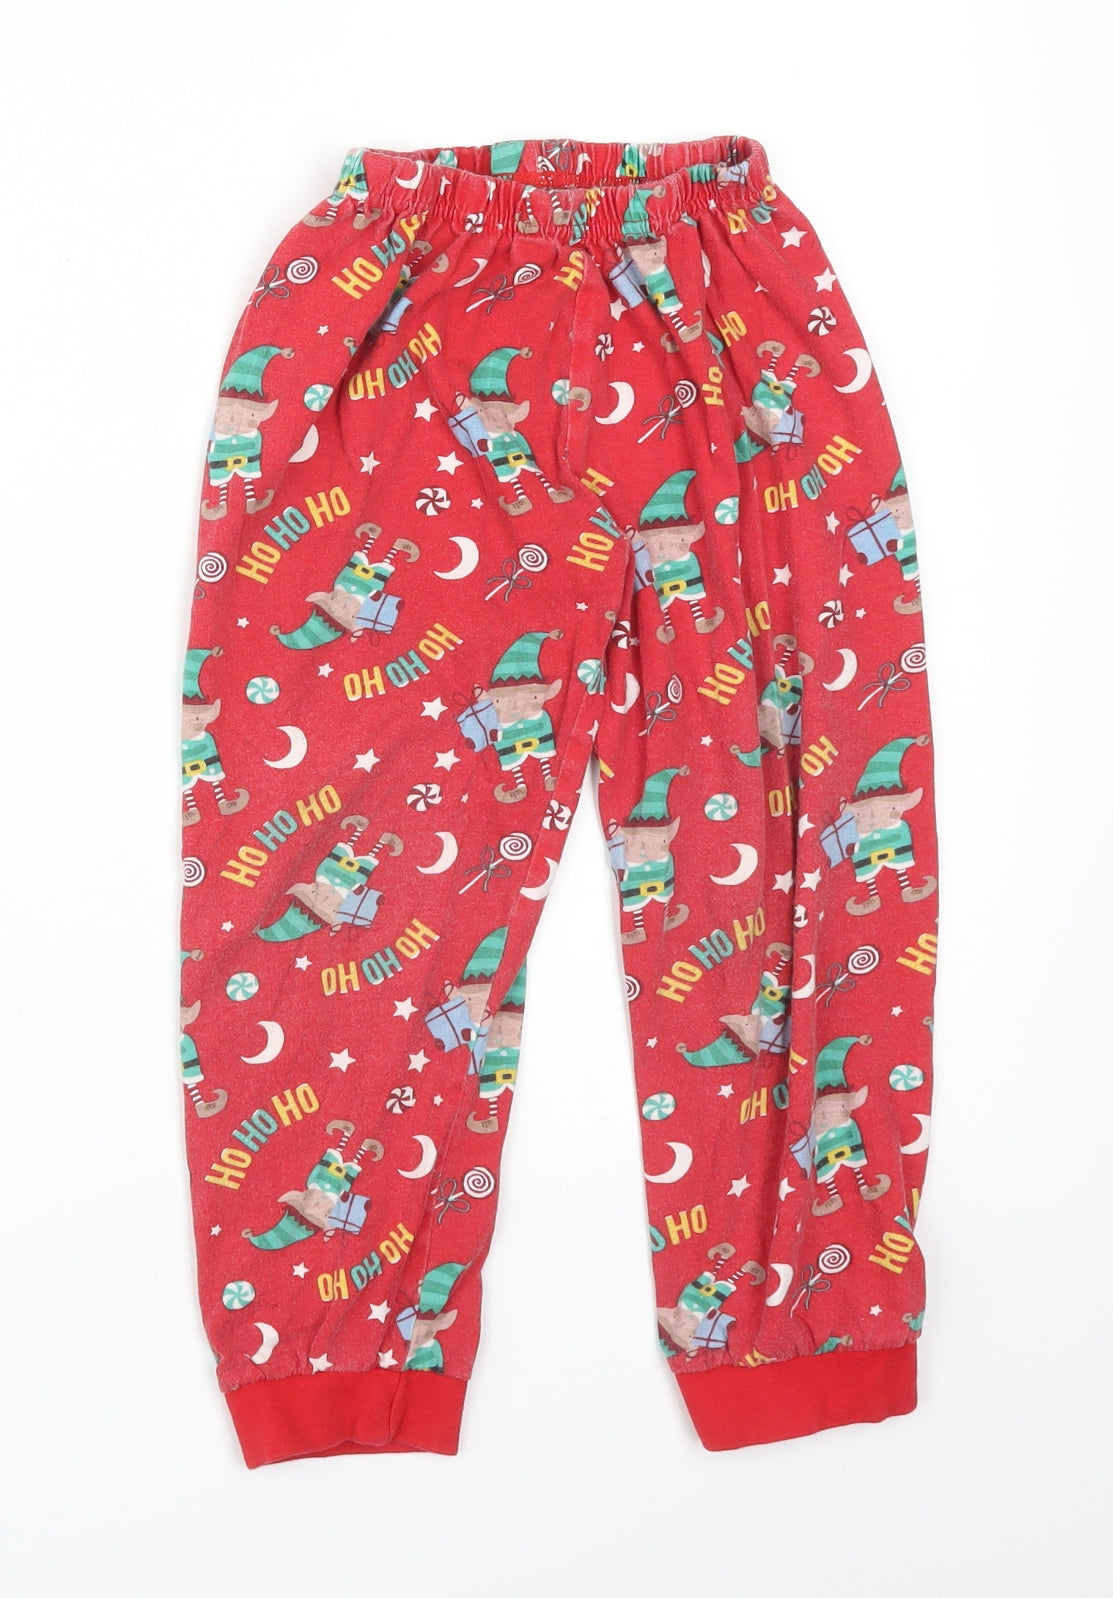 Made By Elves Boys Red Solid Cotton  Pyjama Pants Size 5-6 Years   - CHRISTMAS ELVES